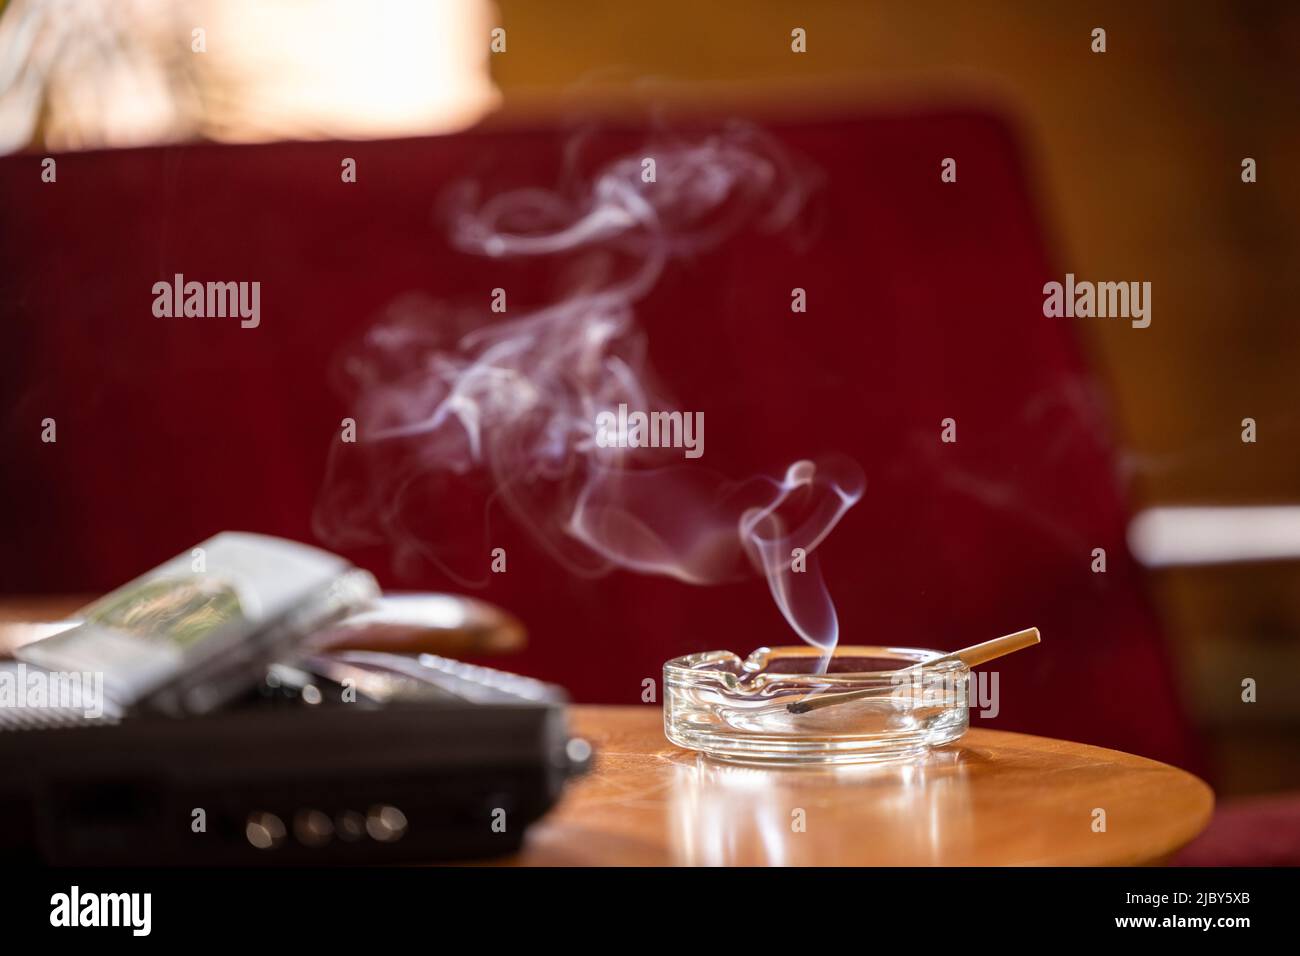 terior, detail of side table with vintage tape recorder / answering machine and ashtray that has a lit CBD pre-roll joint, cigarette with smoke rising Stock Photo